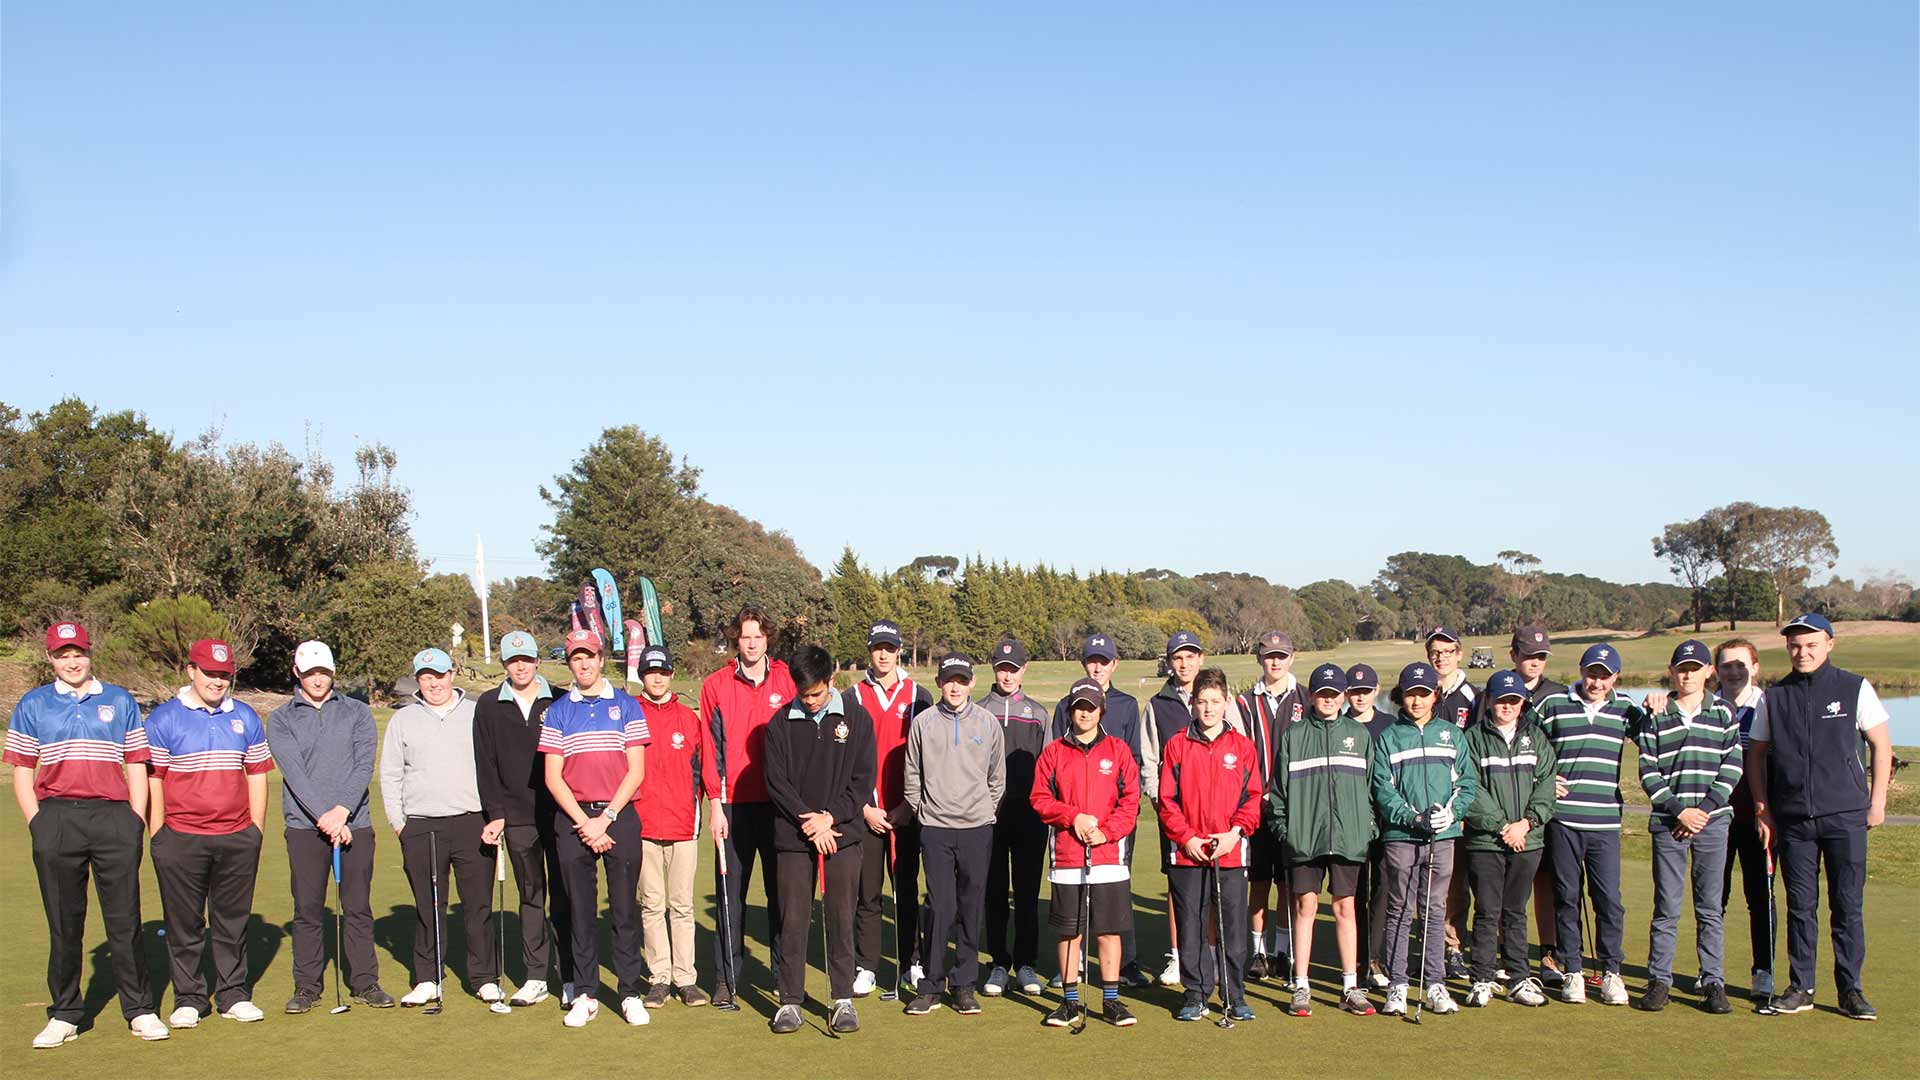 Geelong Independent School Sports Association golf members positioned on a well-manicured golf course, engaged in a social gathering.